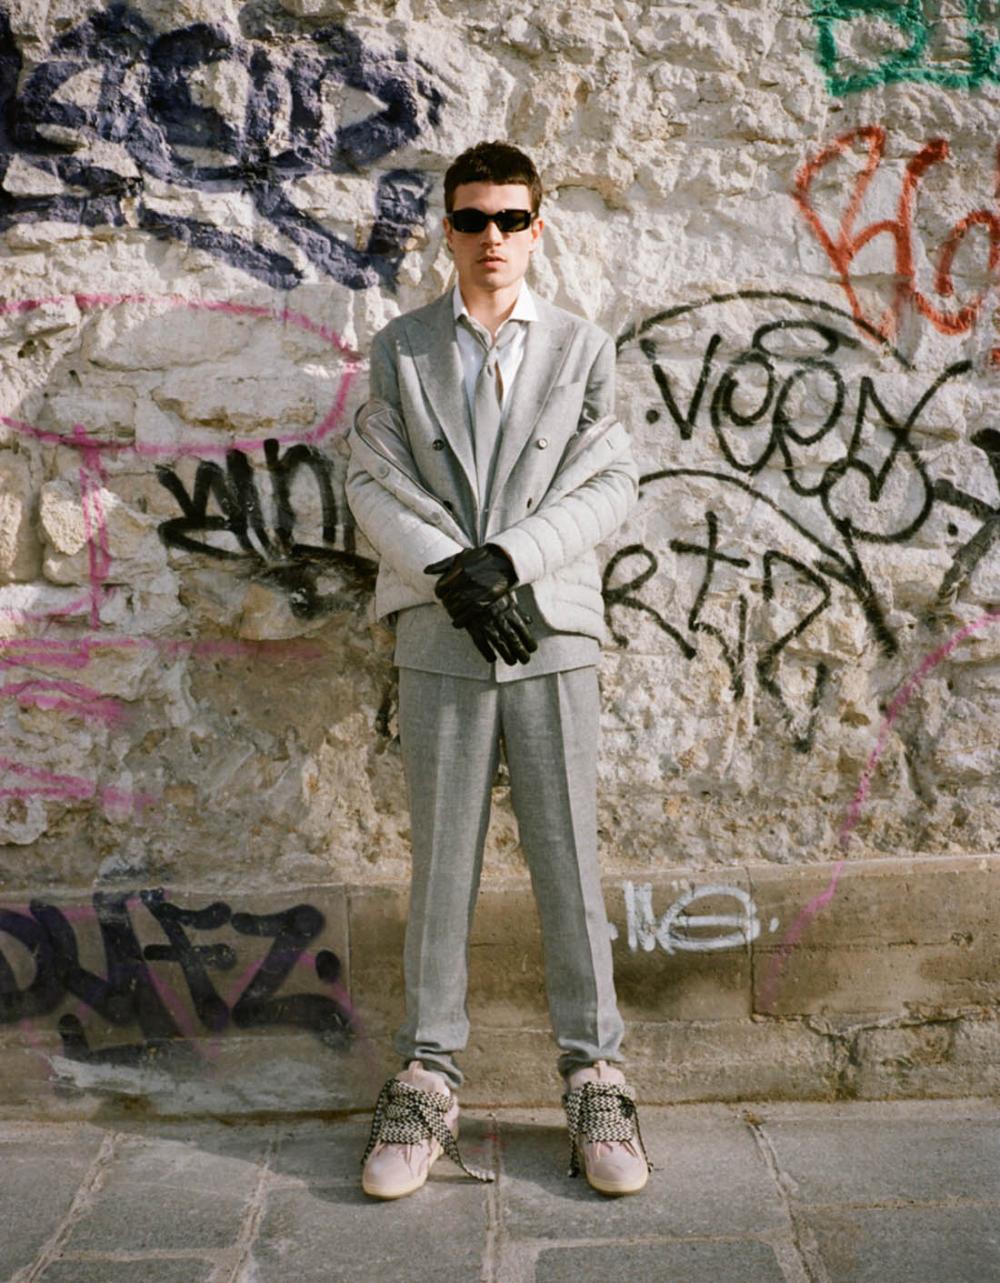 Clothing & Accessories: Herno padded button-up jacket / Jacket, Trousers, Shirt, Tie by Brunello Cucinelli / Sneakers by Lanvin / Sunglasses by Gentle Monster / Photographer: Pierre-Ange Carlotti. Stylist: Marc Goehring. Hair Stylist: Yoann Fernandez